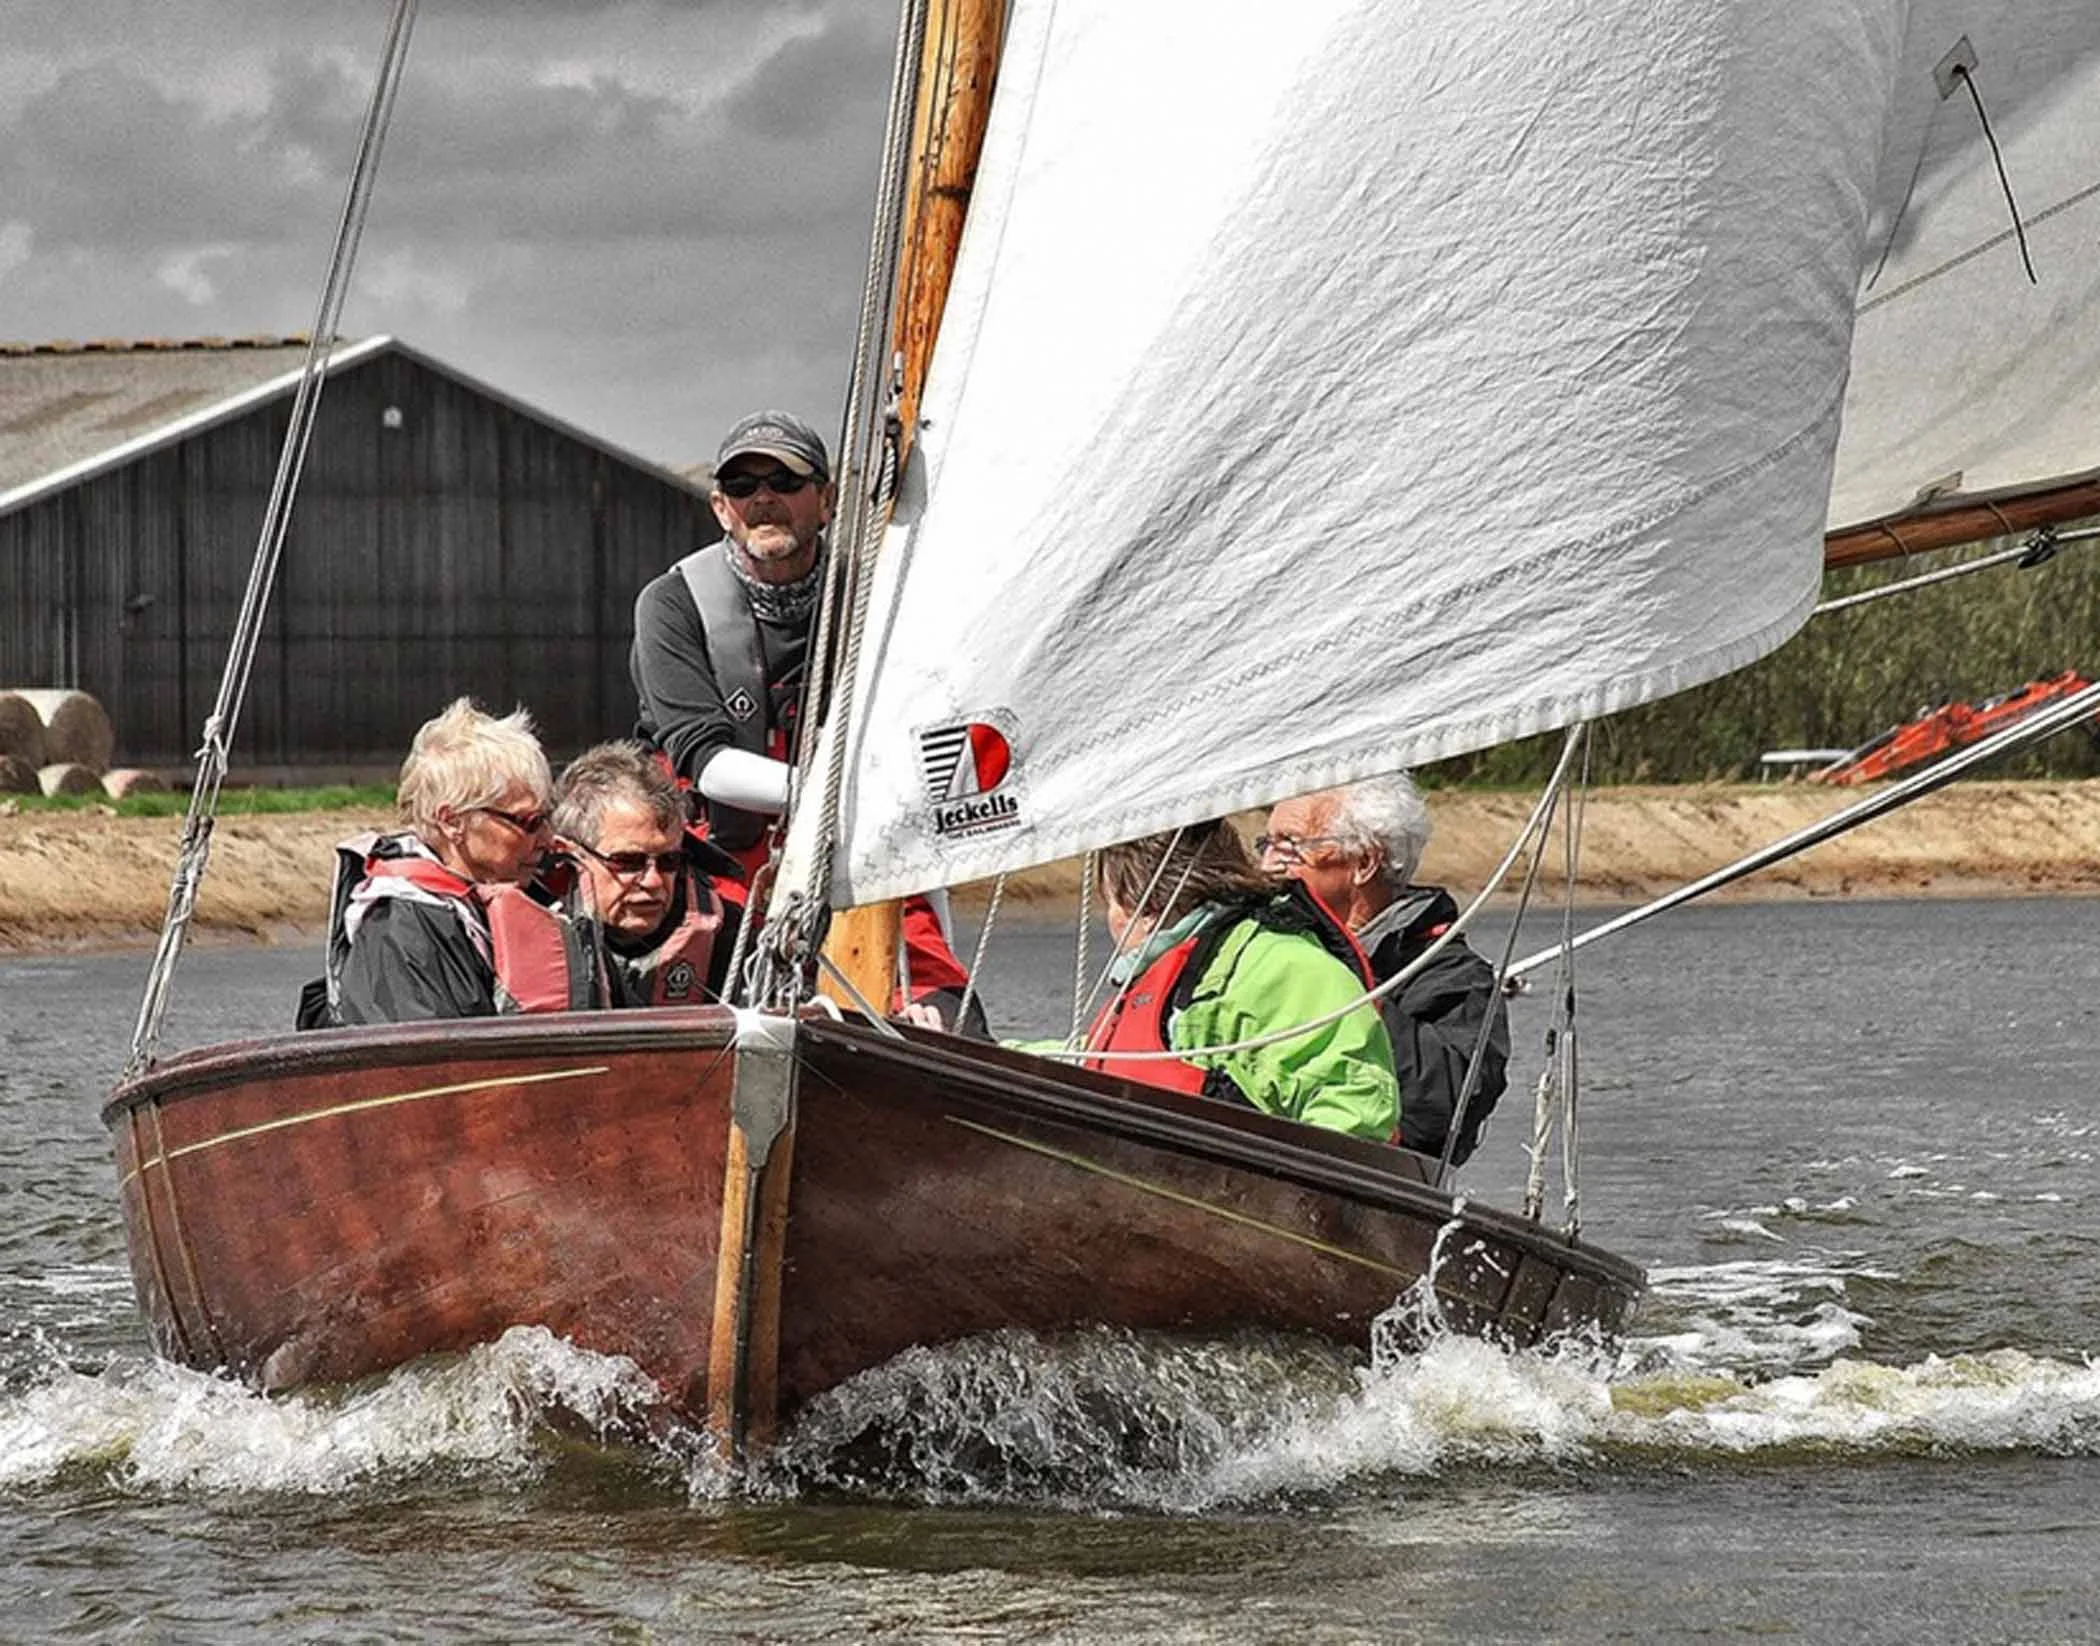 A group out on a skippered sail experience on a traditional wooden half-decker.